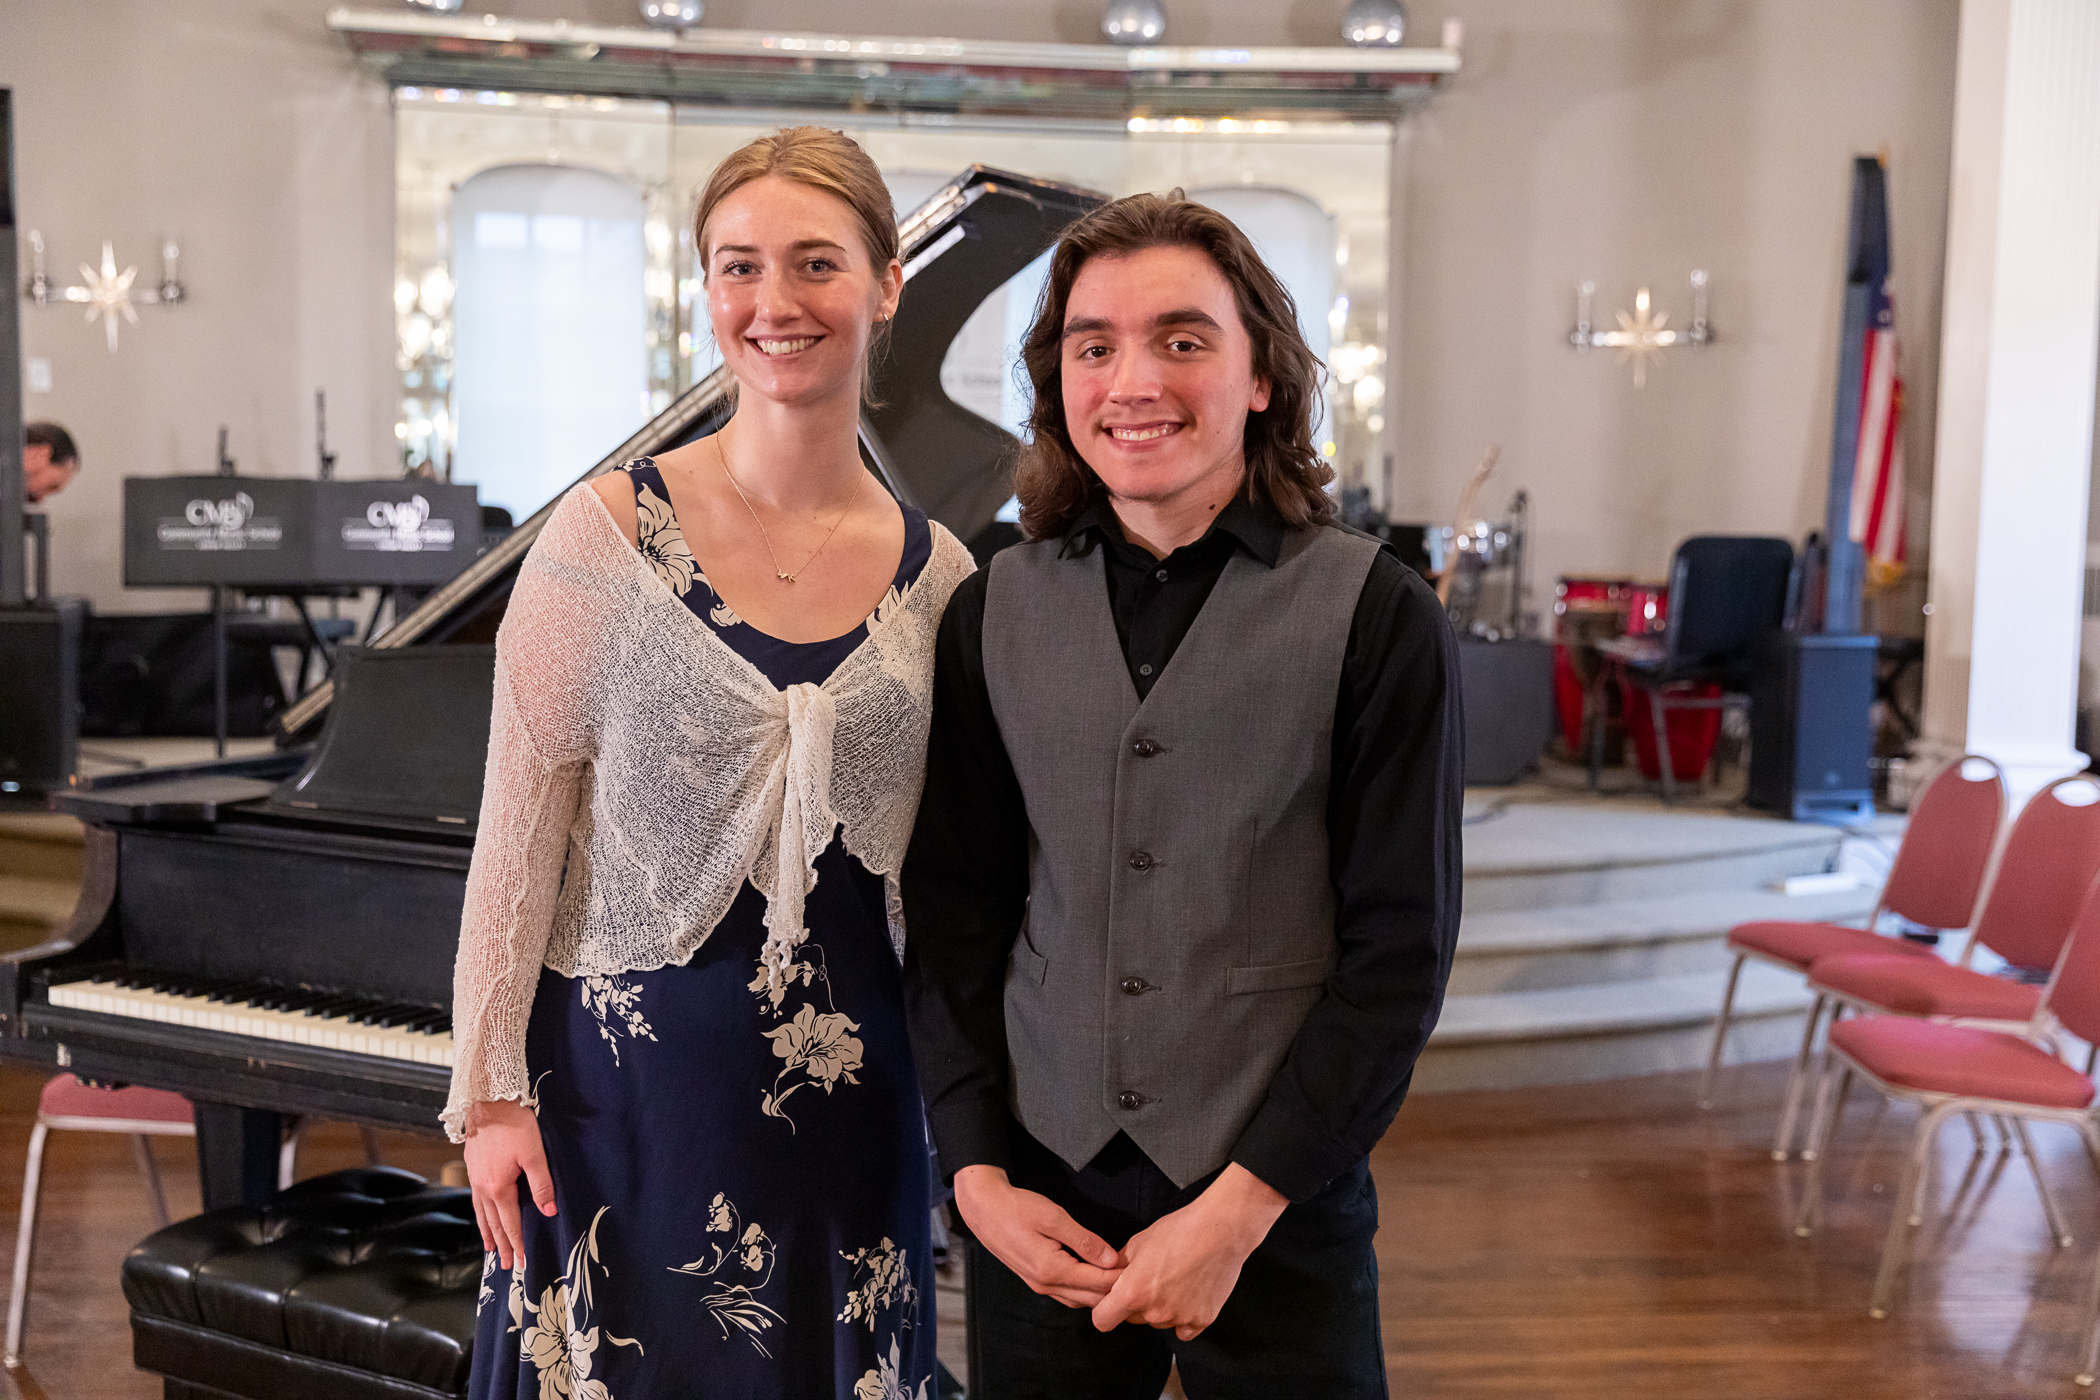 Kelly Hooper piano teacher with student Ceiran Magee at Community Music School in the Dorothy H. Baker Recital Hall